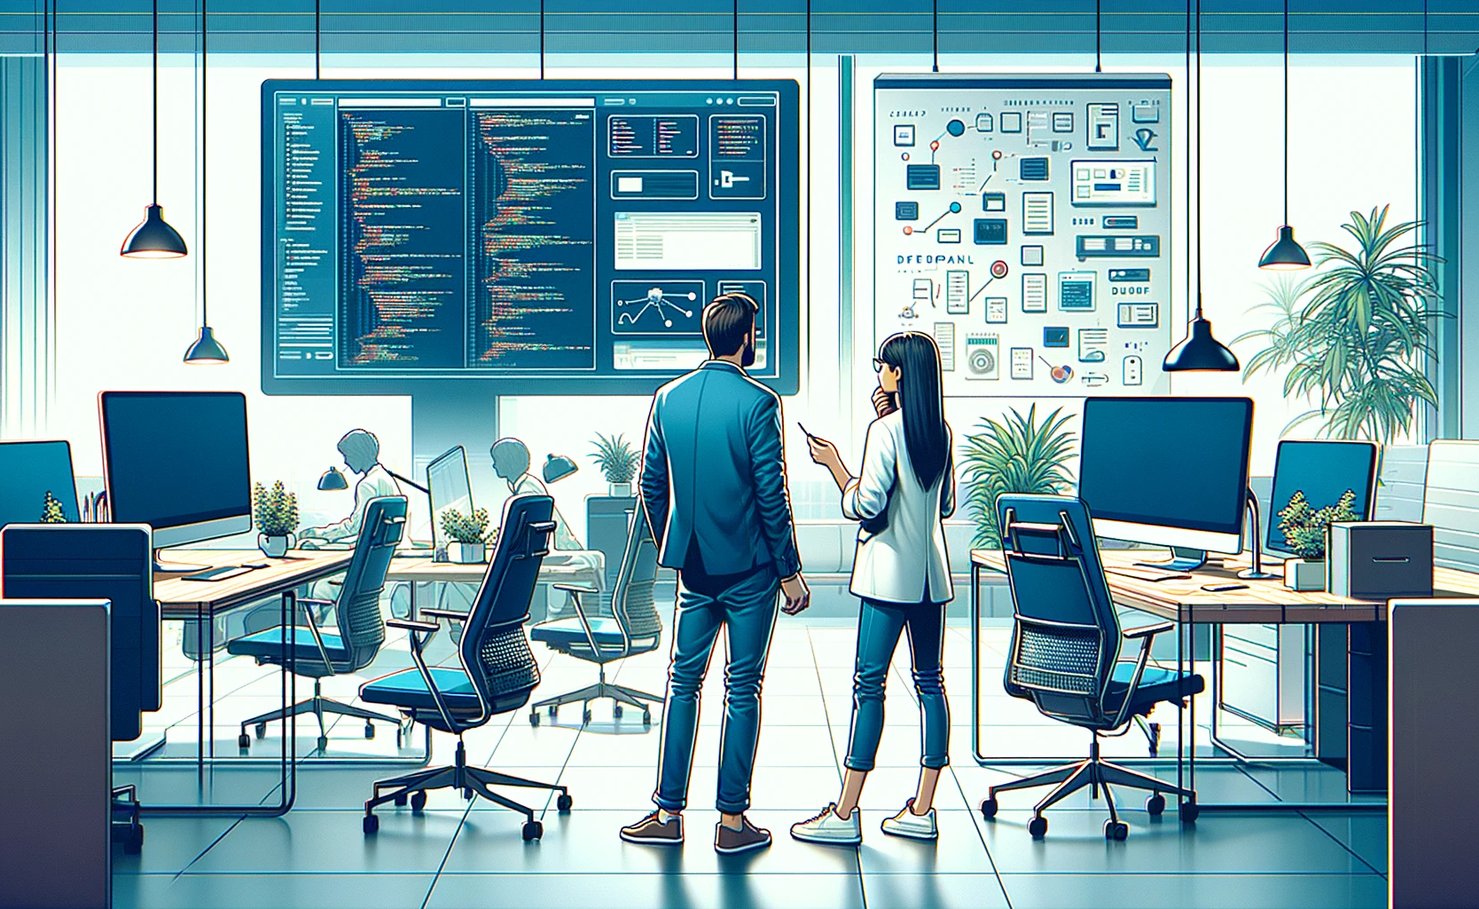 Create a landscape format poster featuring two individuals in a contemporary setting, standing in front of a modern computer, planning how to build or